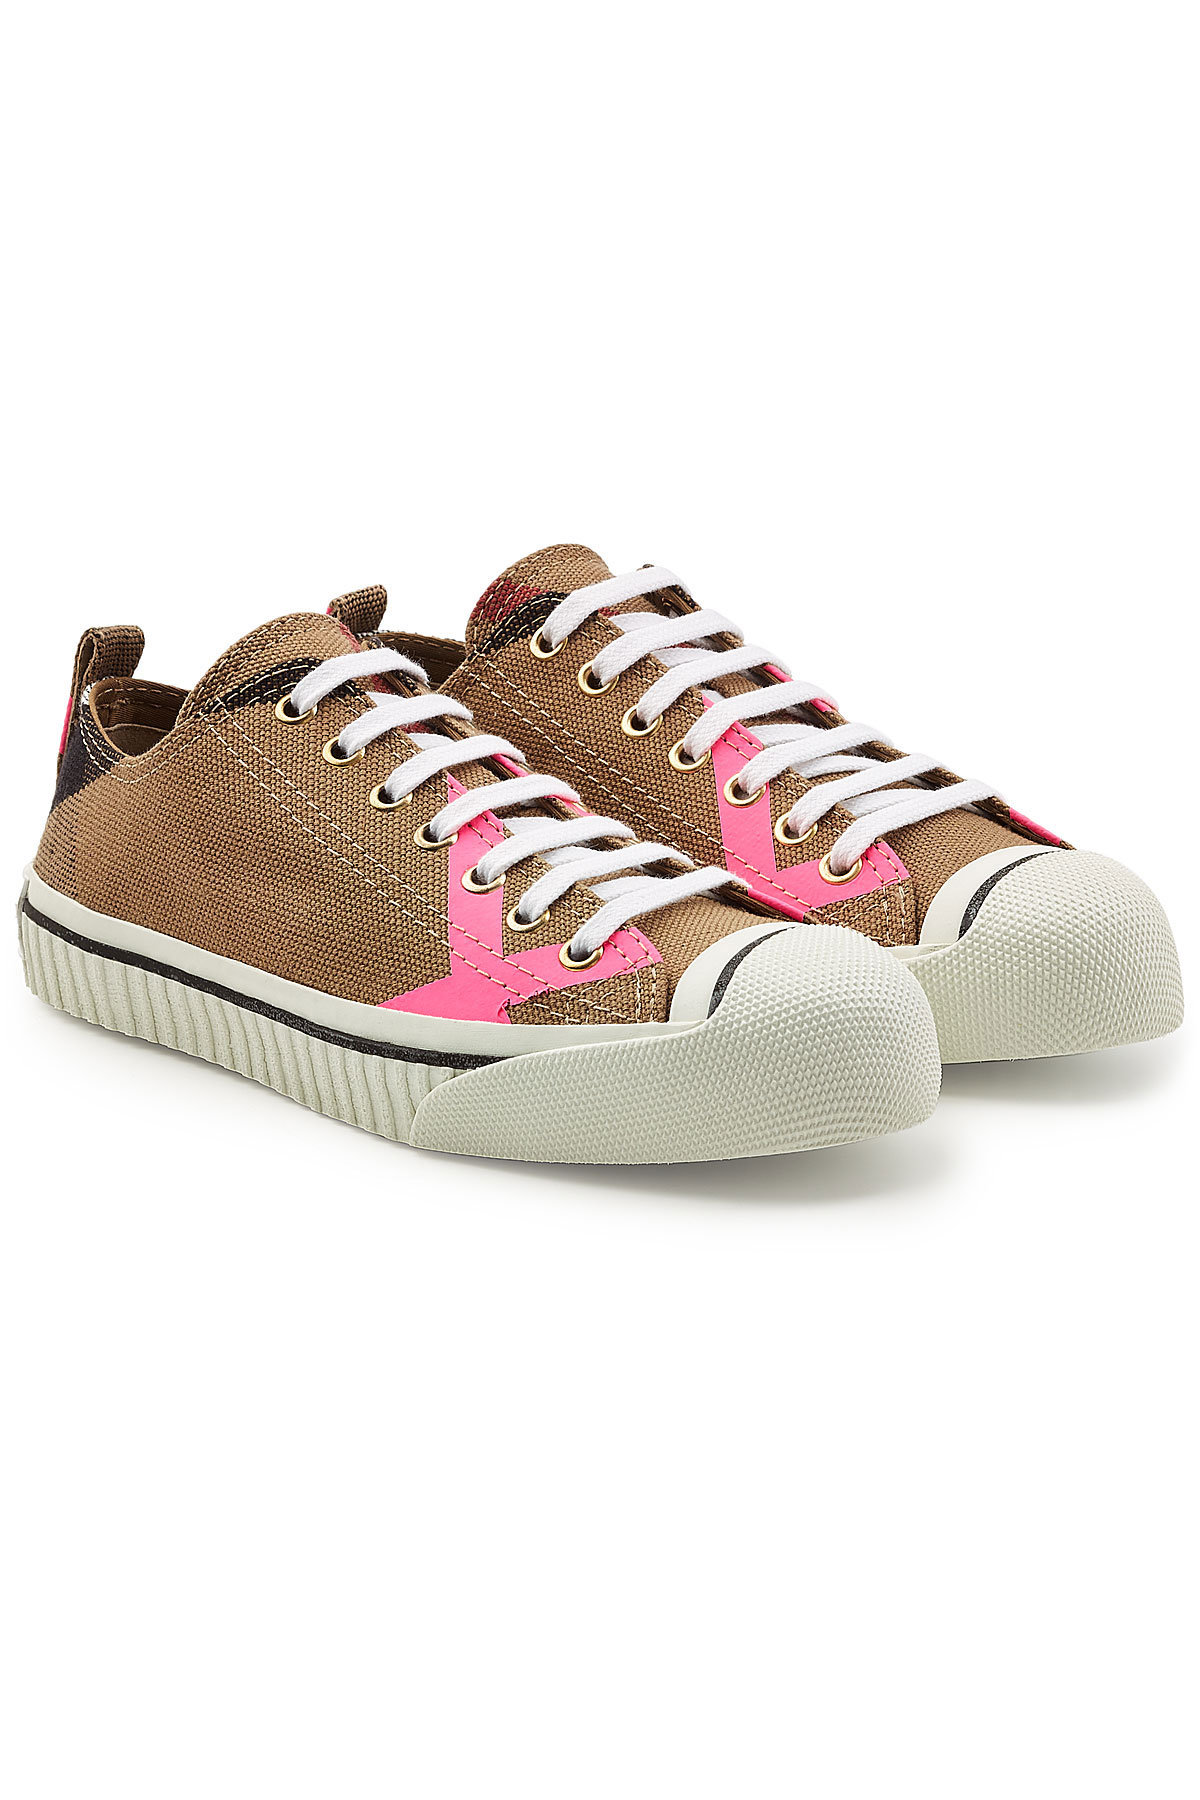 Burberry - Bourne Low Top Fabric Sneakers